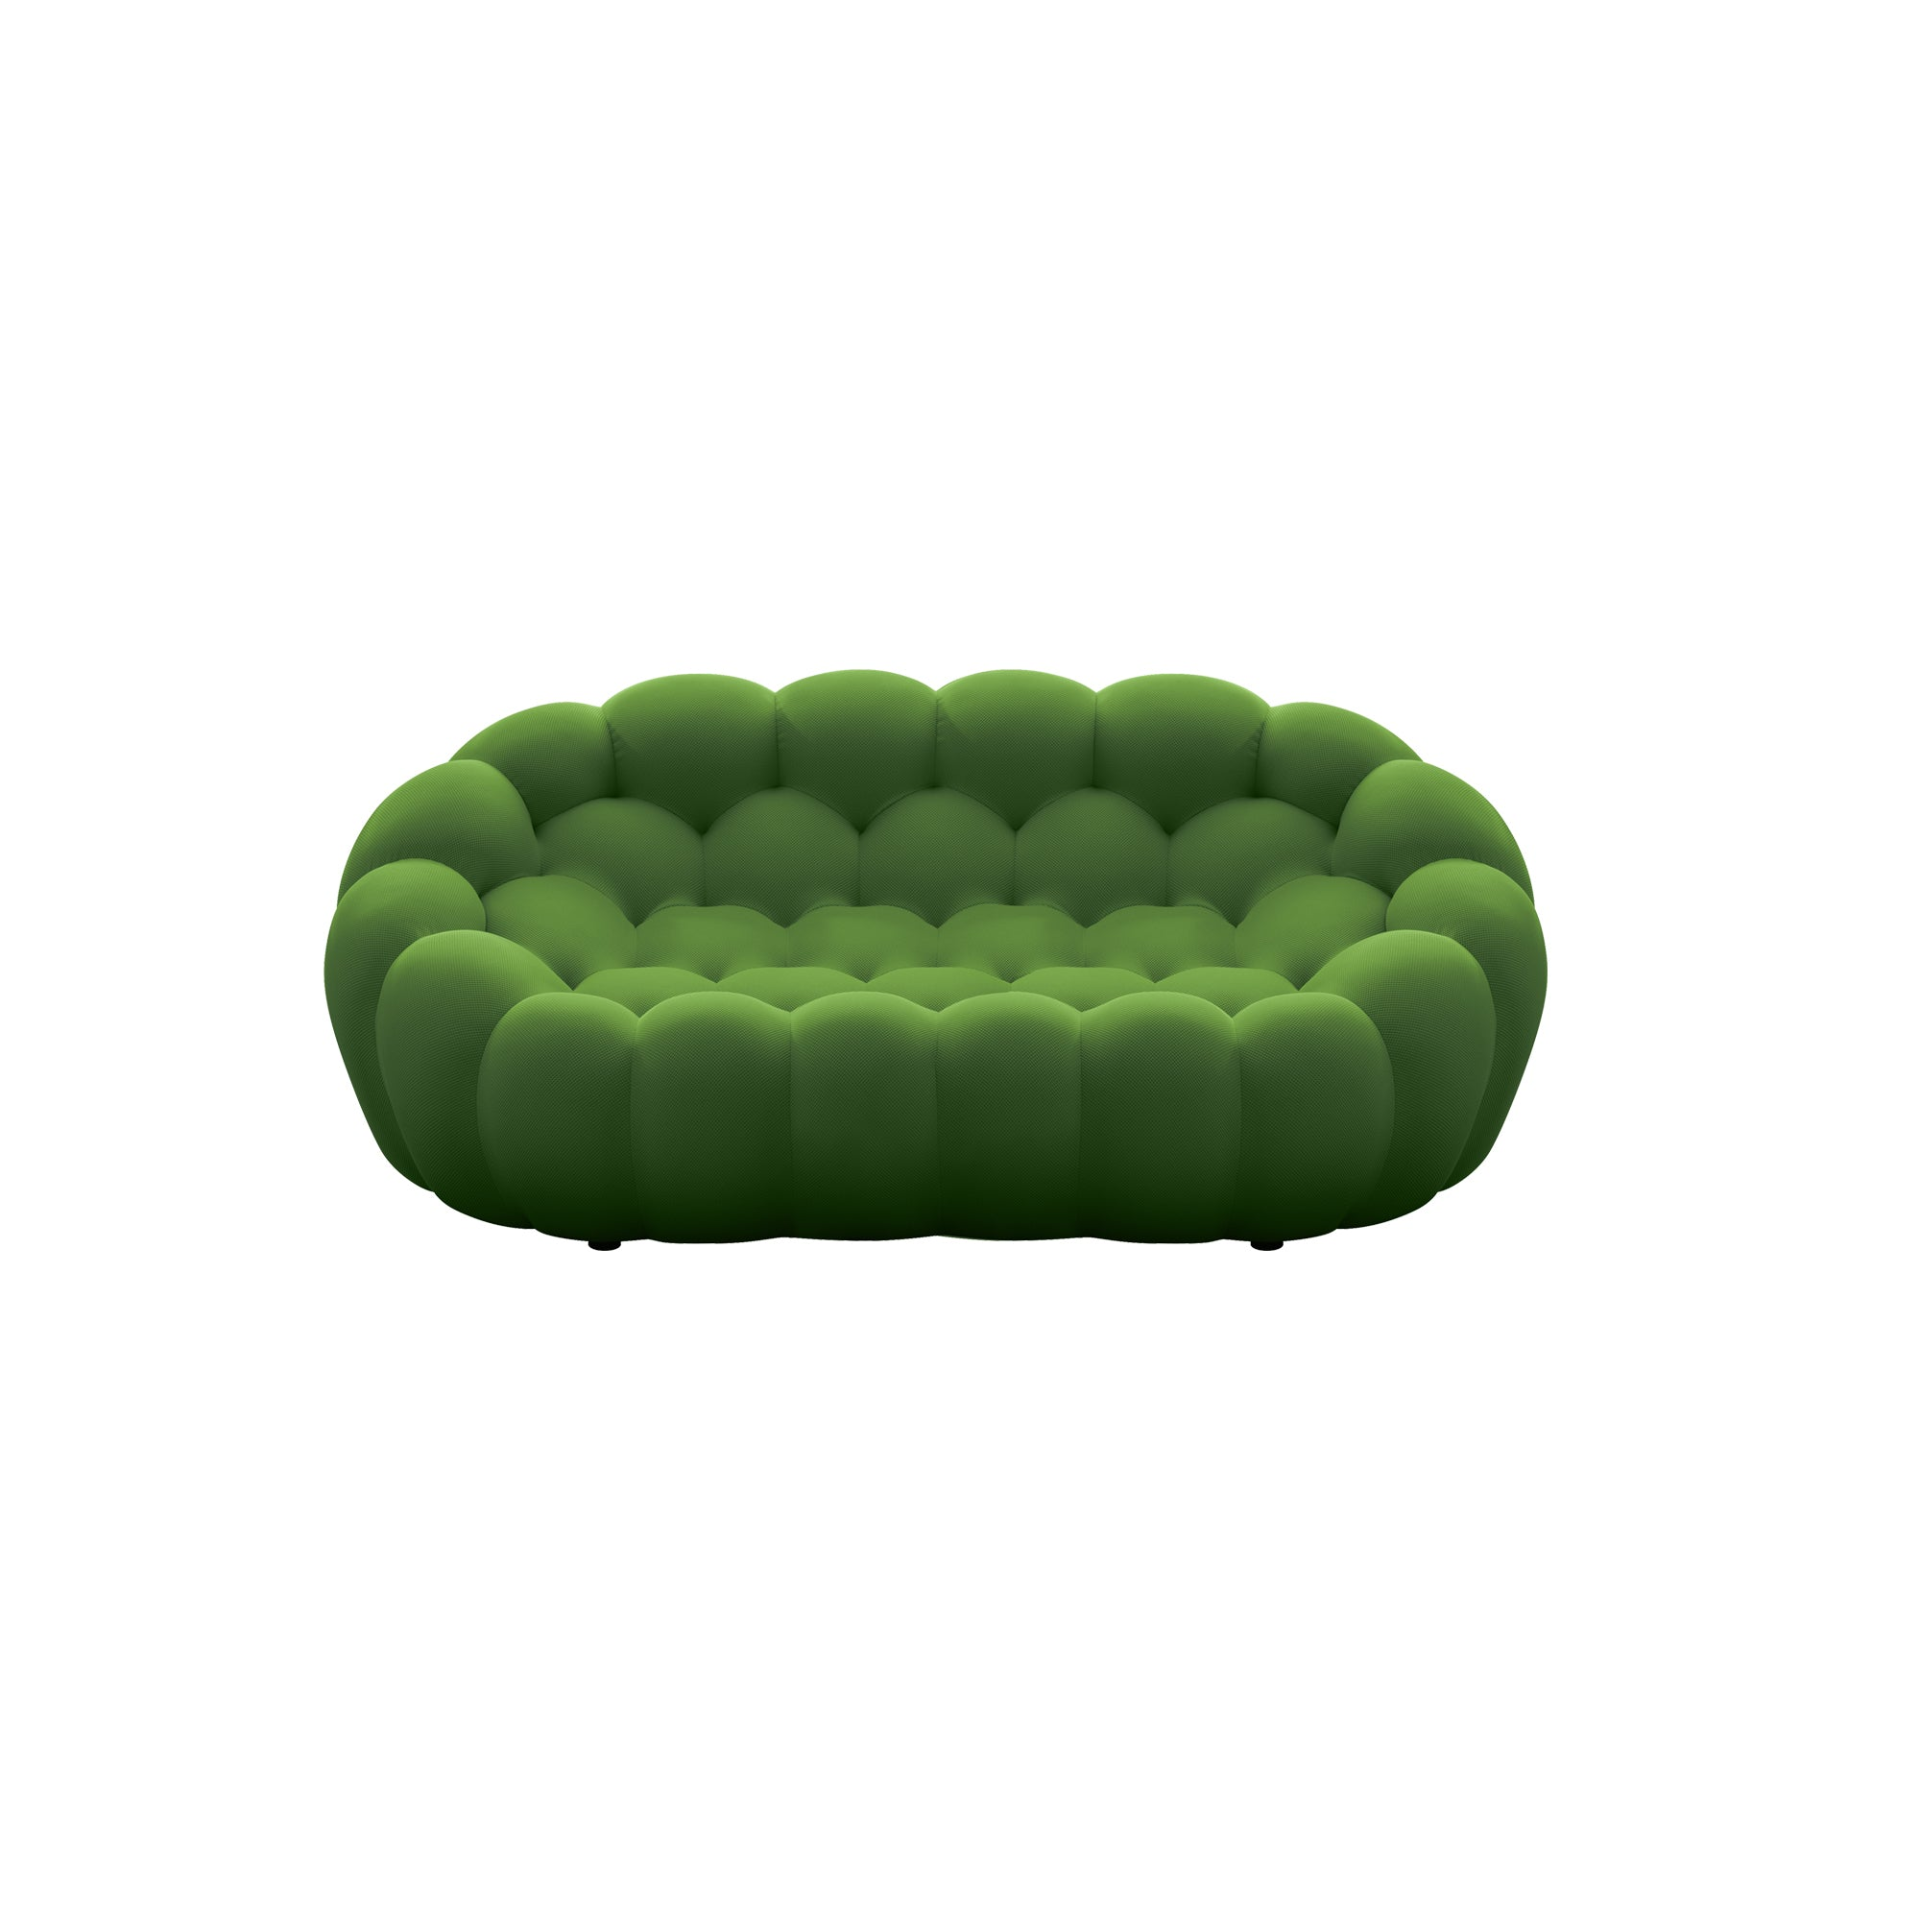 74.8'' Modern bubble floor couch for living room,green